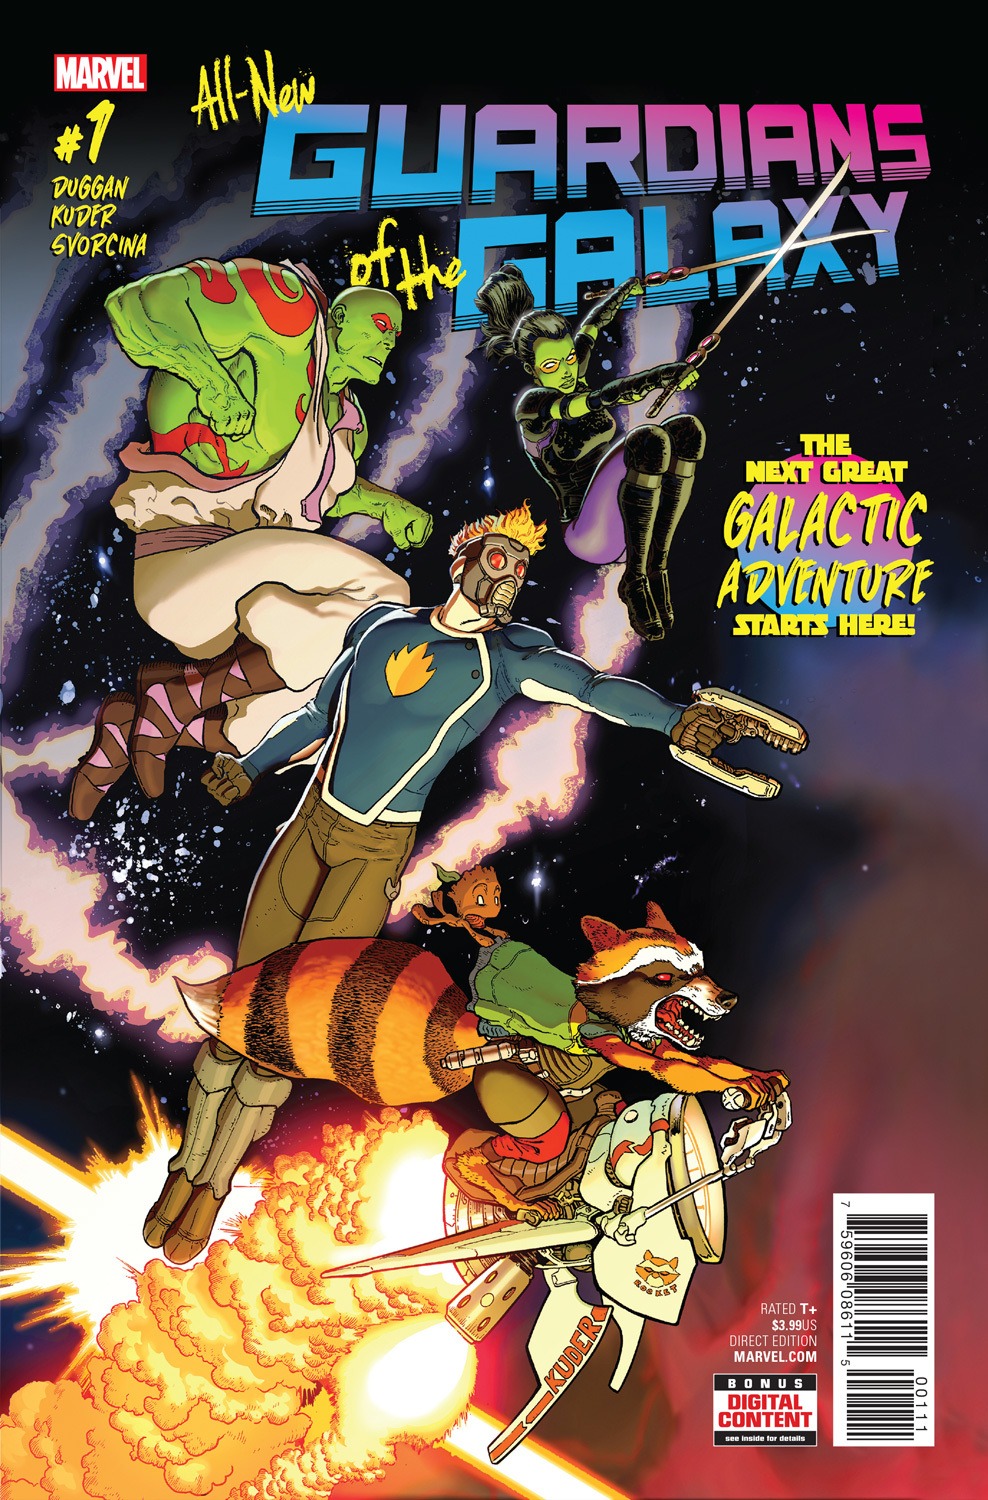 Marvel Comics News Digest 4/3 – 4/7 Featuring Jean Grey and Guardians of the Galaxy